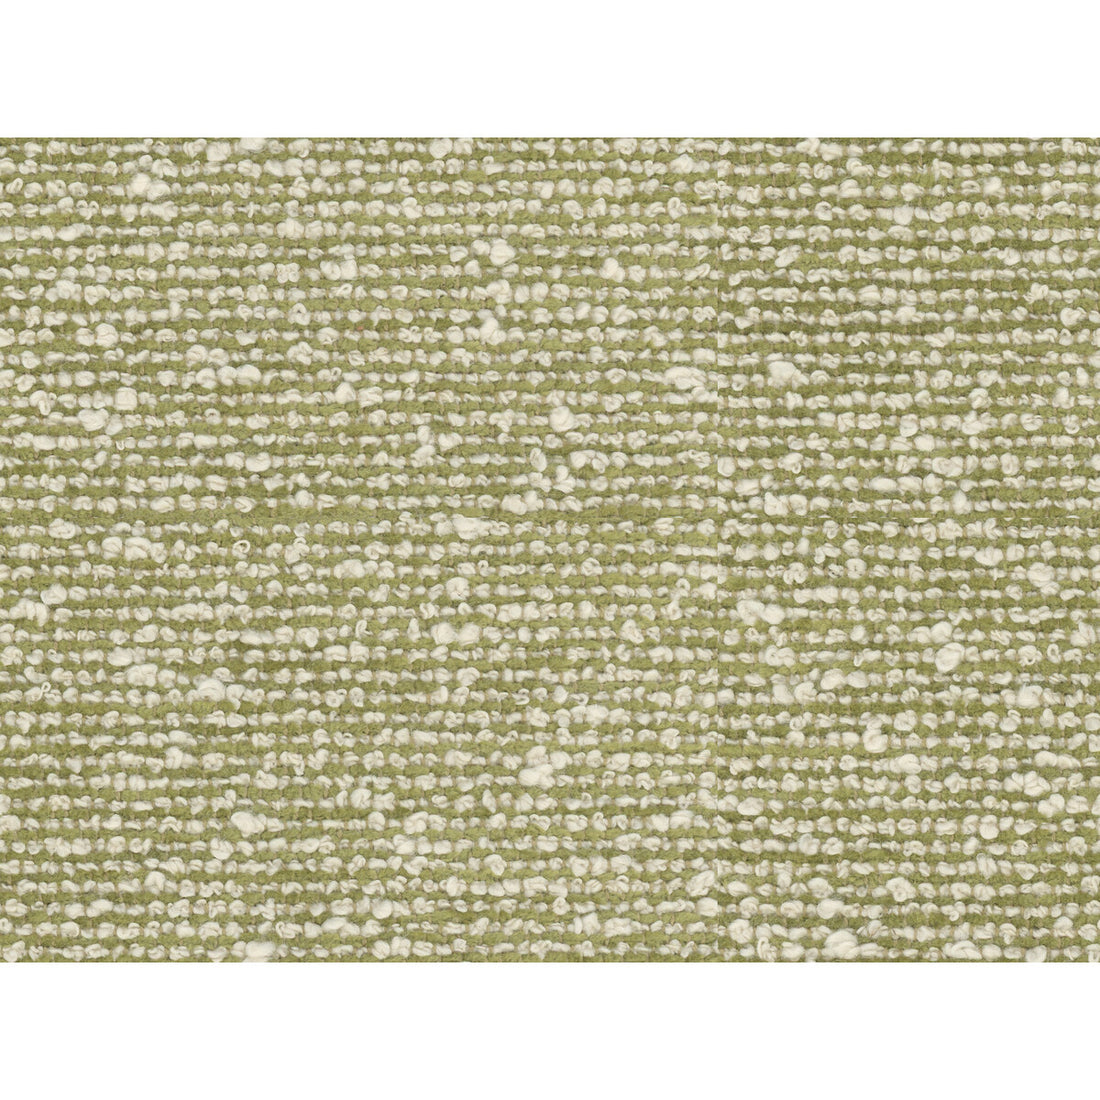 Vanoise Chenille fabric in celery color - pattern 8016104.3.0 - by Brunschwig &amp; Fils in the Chambery Textures collection